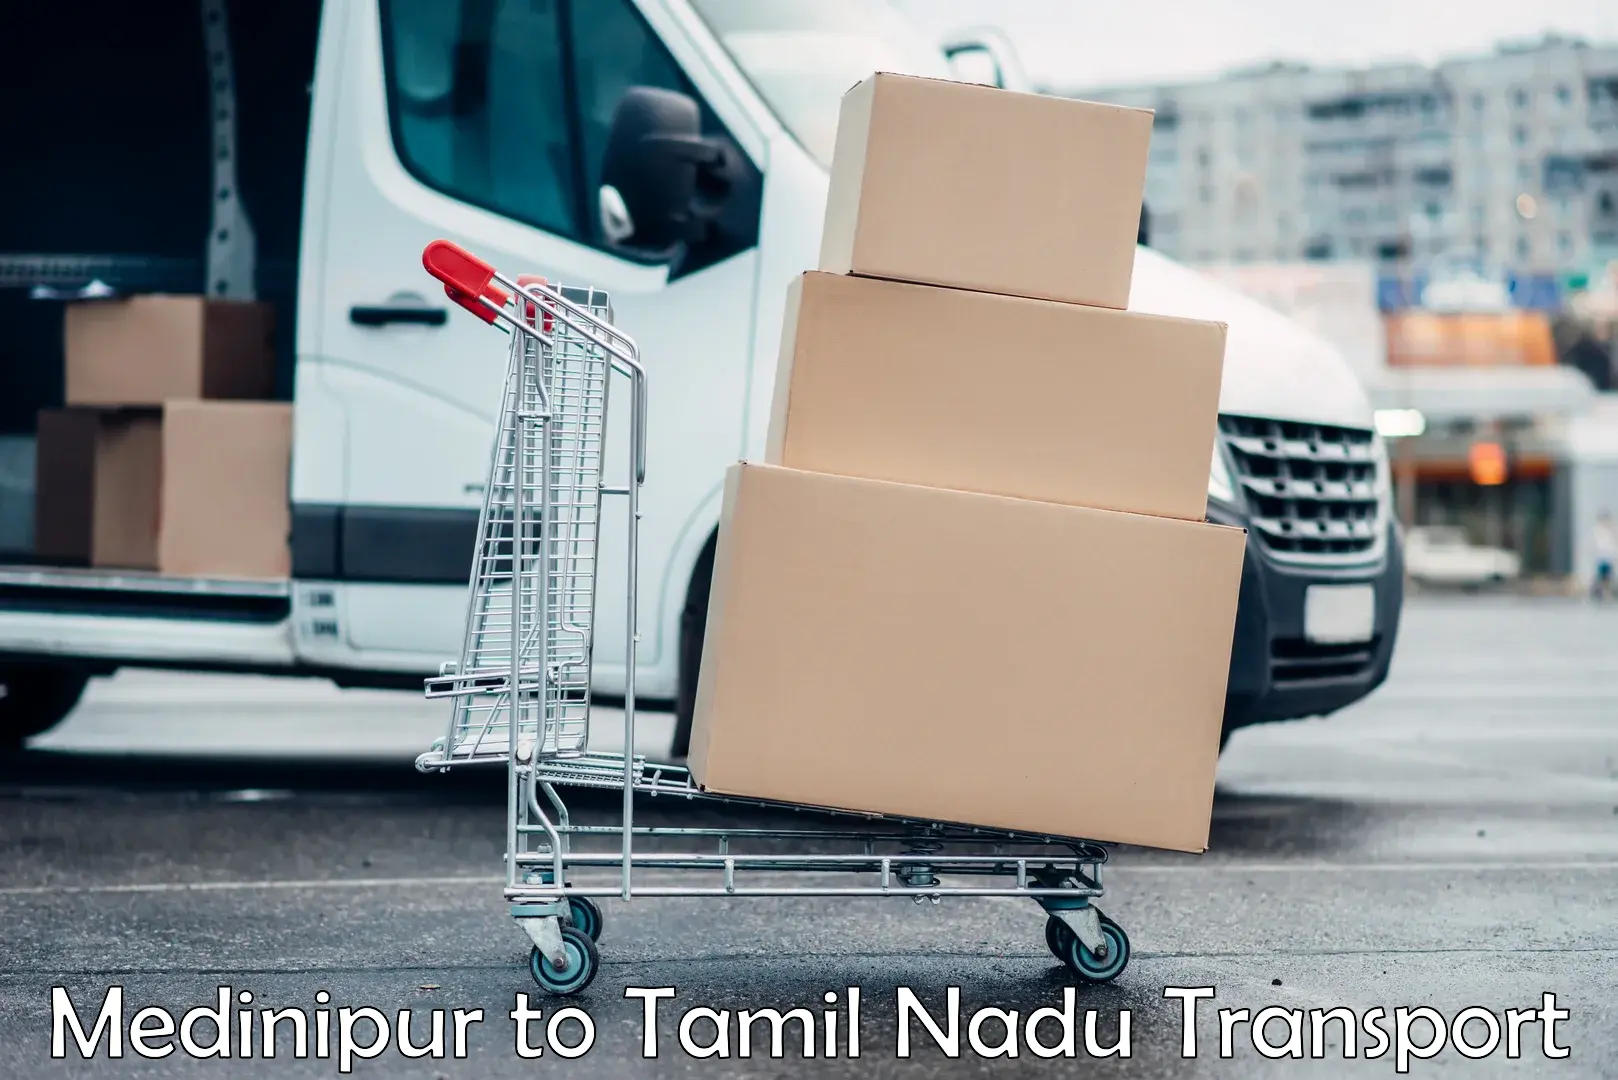 Pick up transport service Medinipur to Shanmugha Arts Science Technology and Research Academy Thanjavur